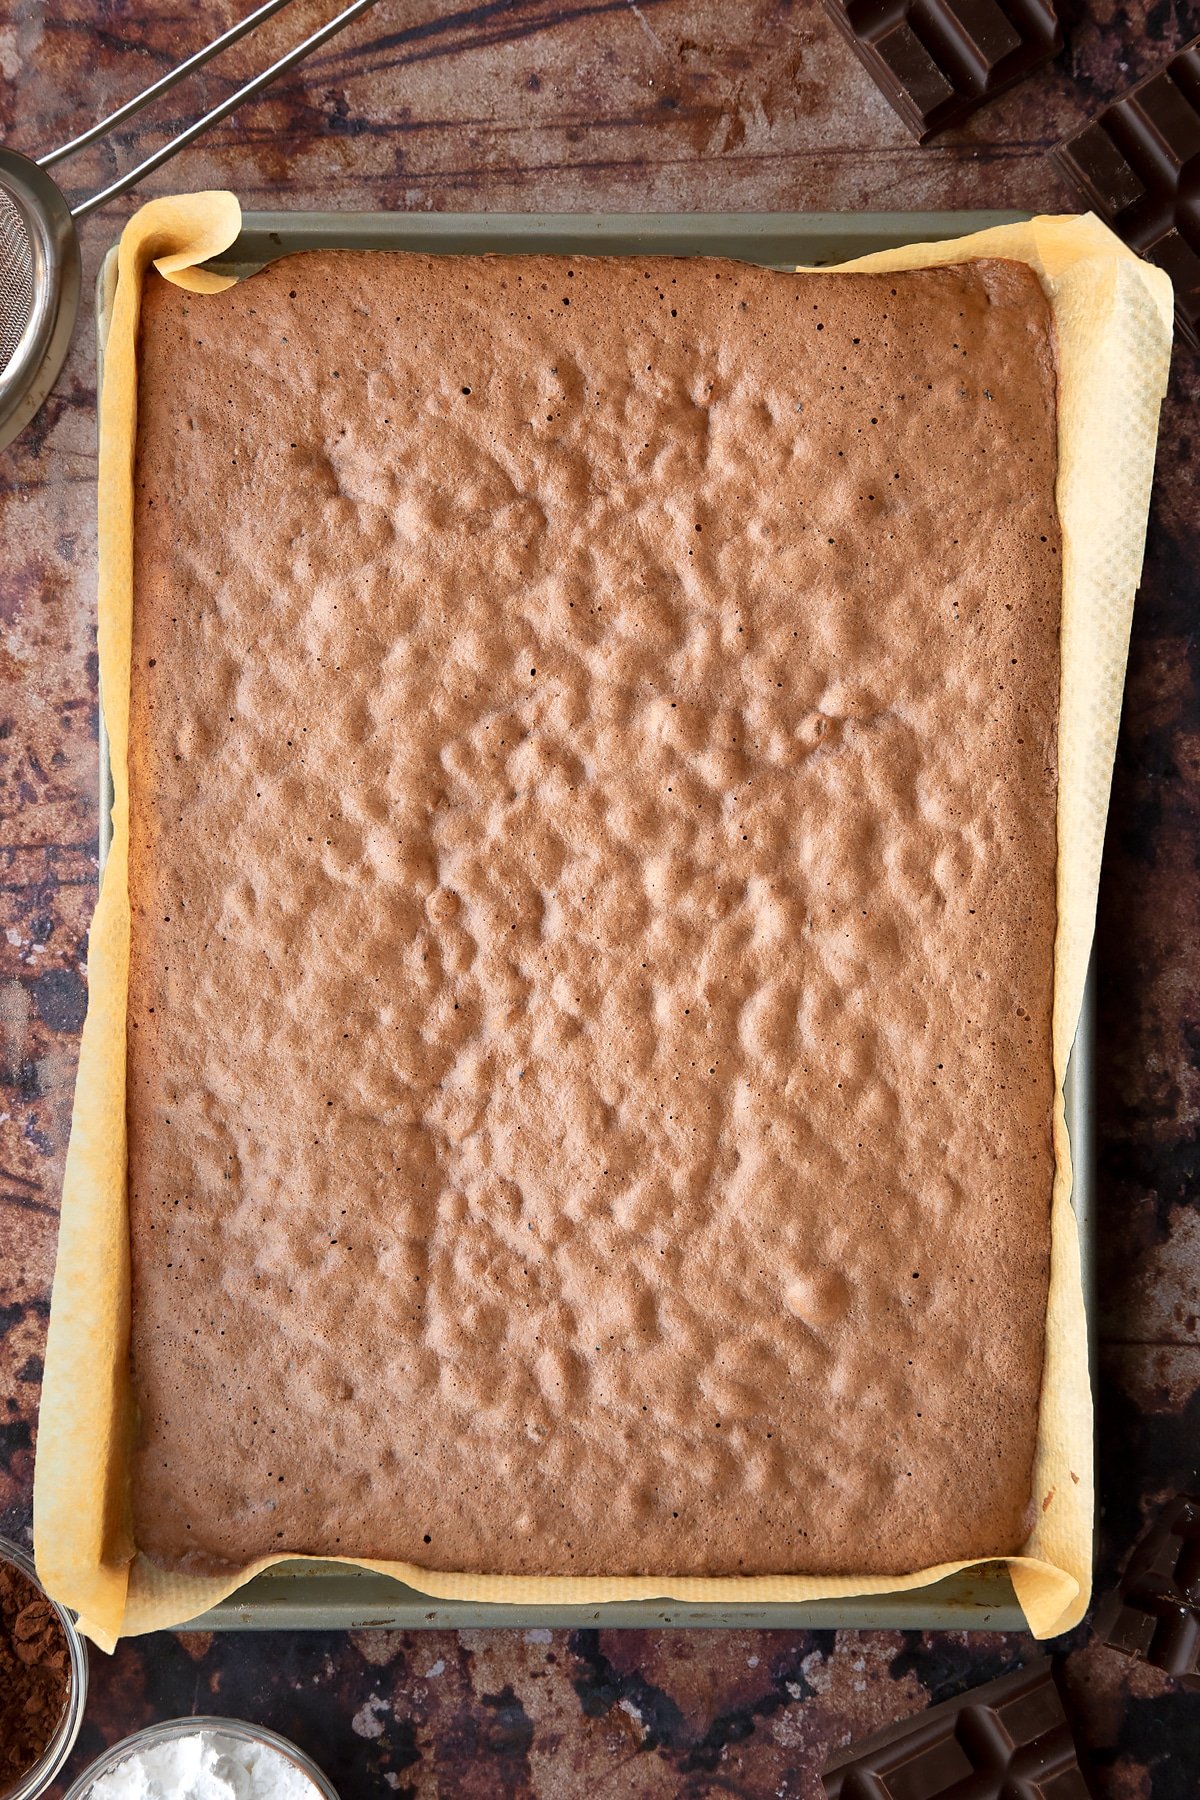 Cooked chocolate sponge in a lined Swiss roll tray. Ingredients for the caterpillar cake recipe surround the tray.